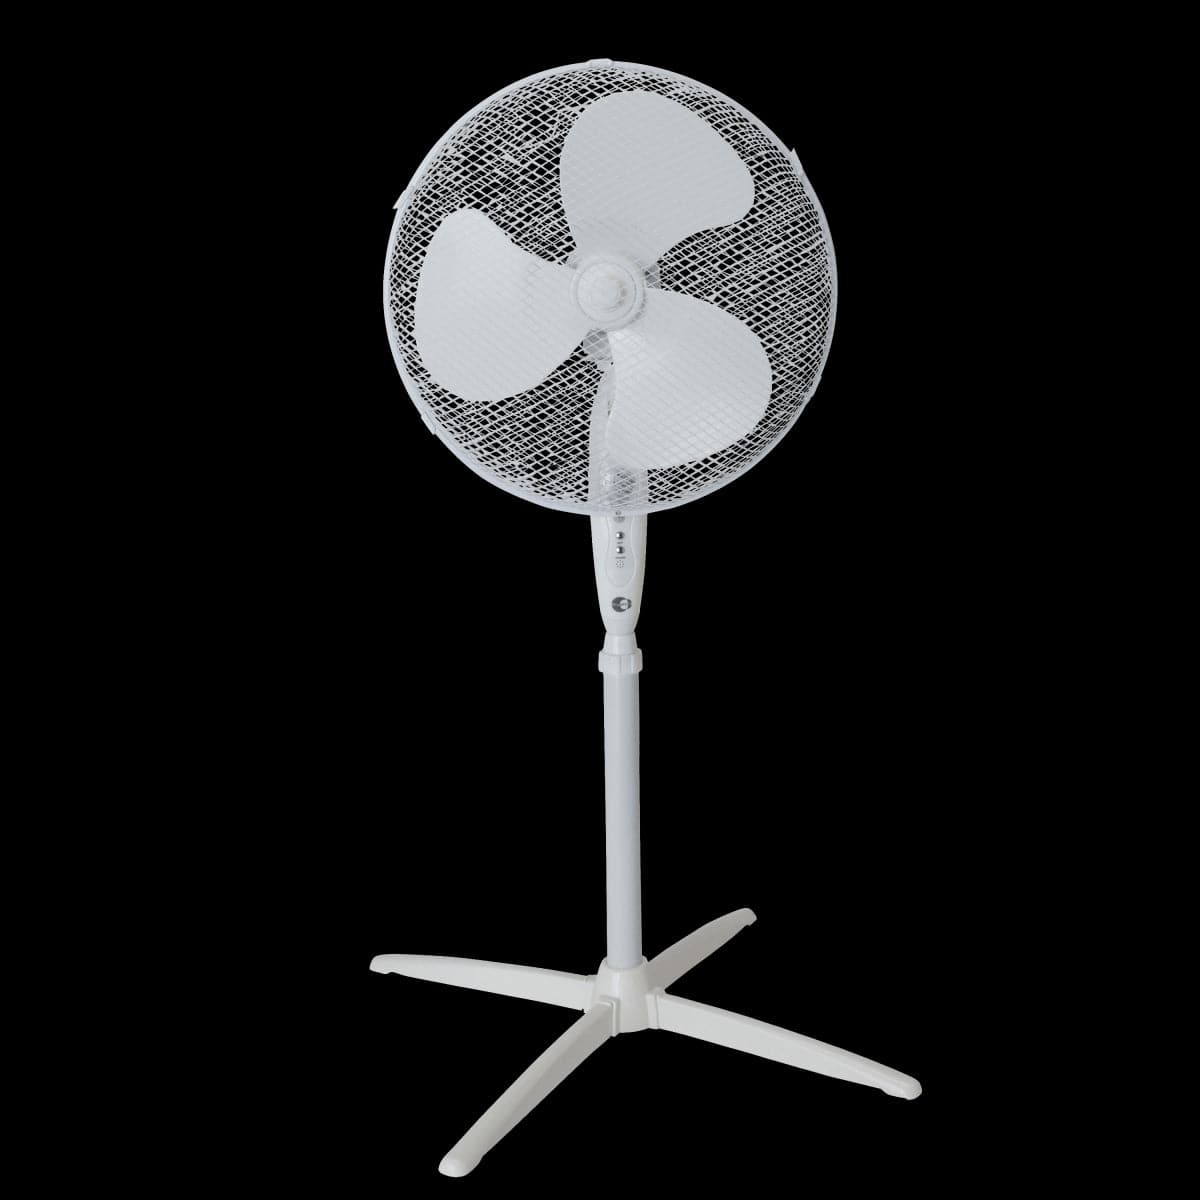 FLOOR STANDING FAN 40CM 45W WHITE WITH REMOTE CONTROL EQUATION